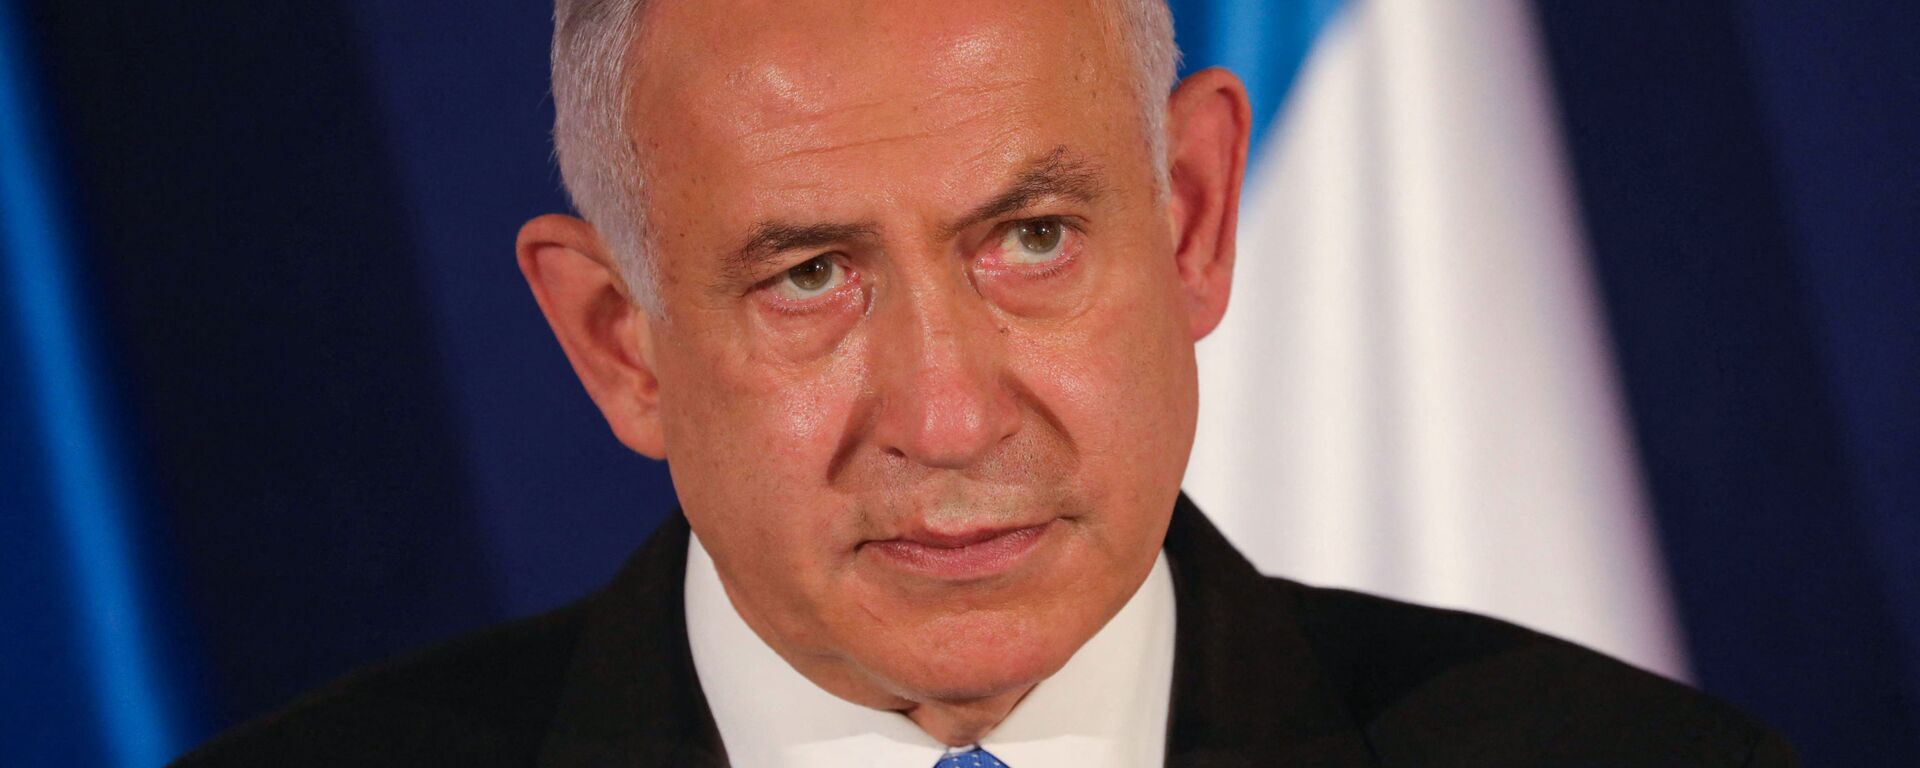 In this file photo taken on March 11, 2021 Israeli Prime Minister Benjamin Netanyahu speaks during a joint press conference with his Hungarian and Czech counterparts in Jerusalem - Sputnik International, 1920, 14.01.2022